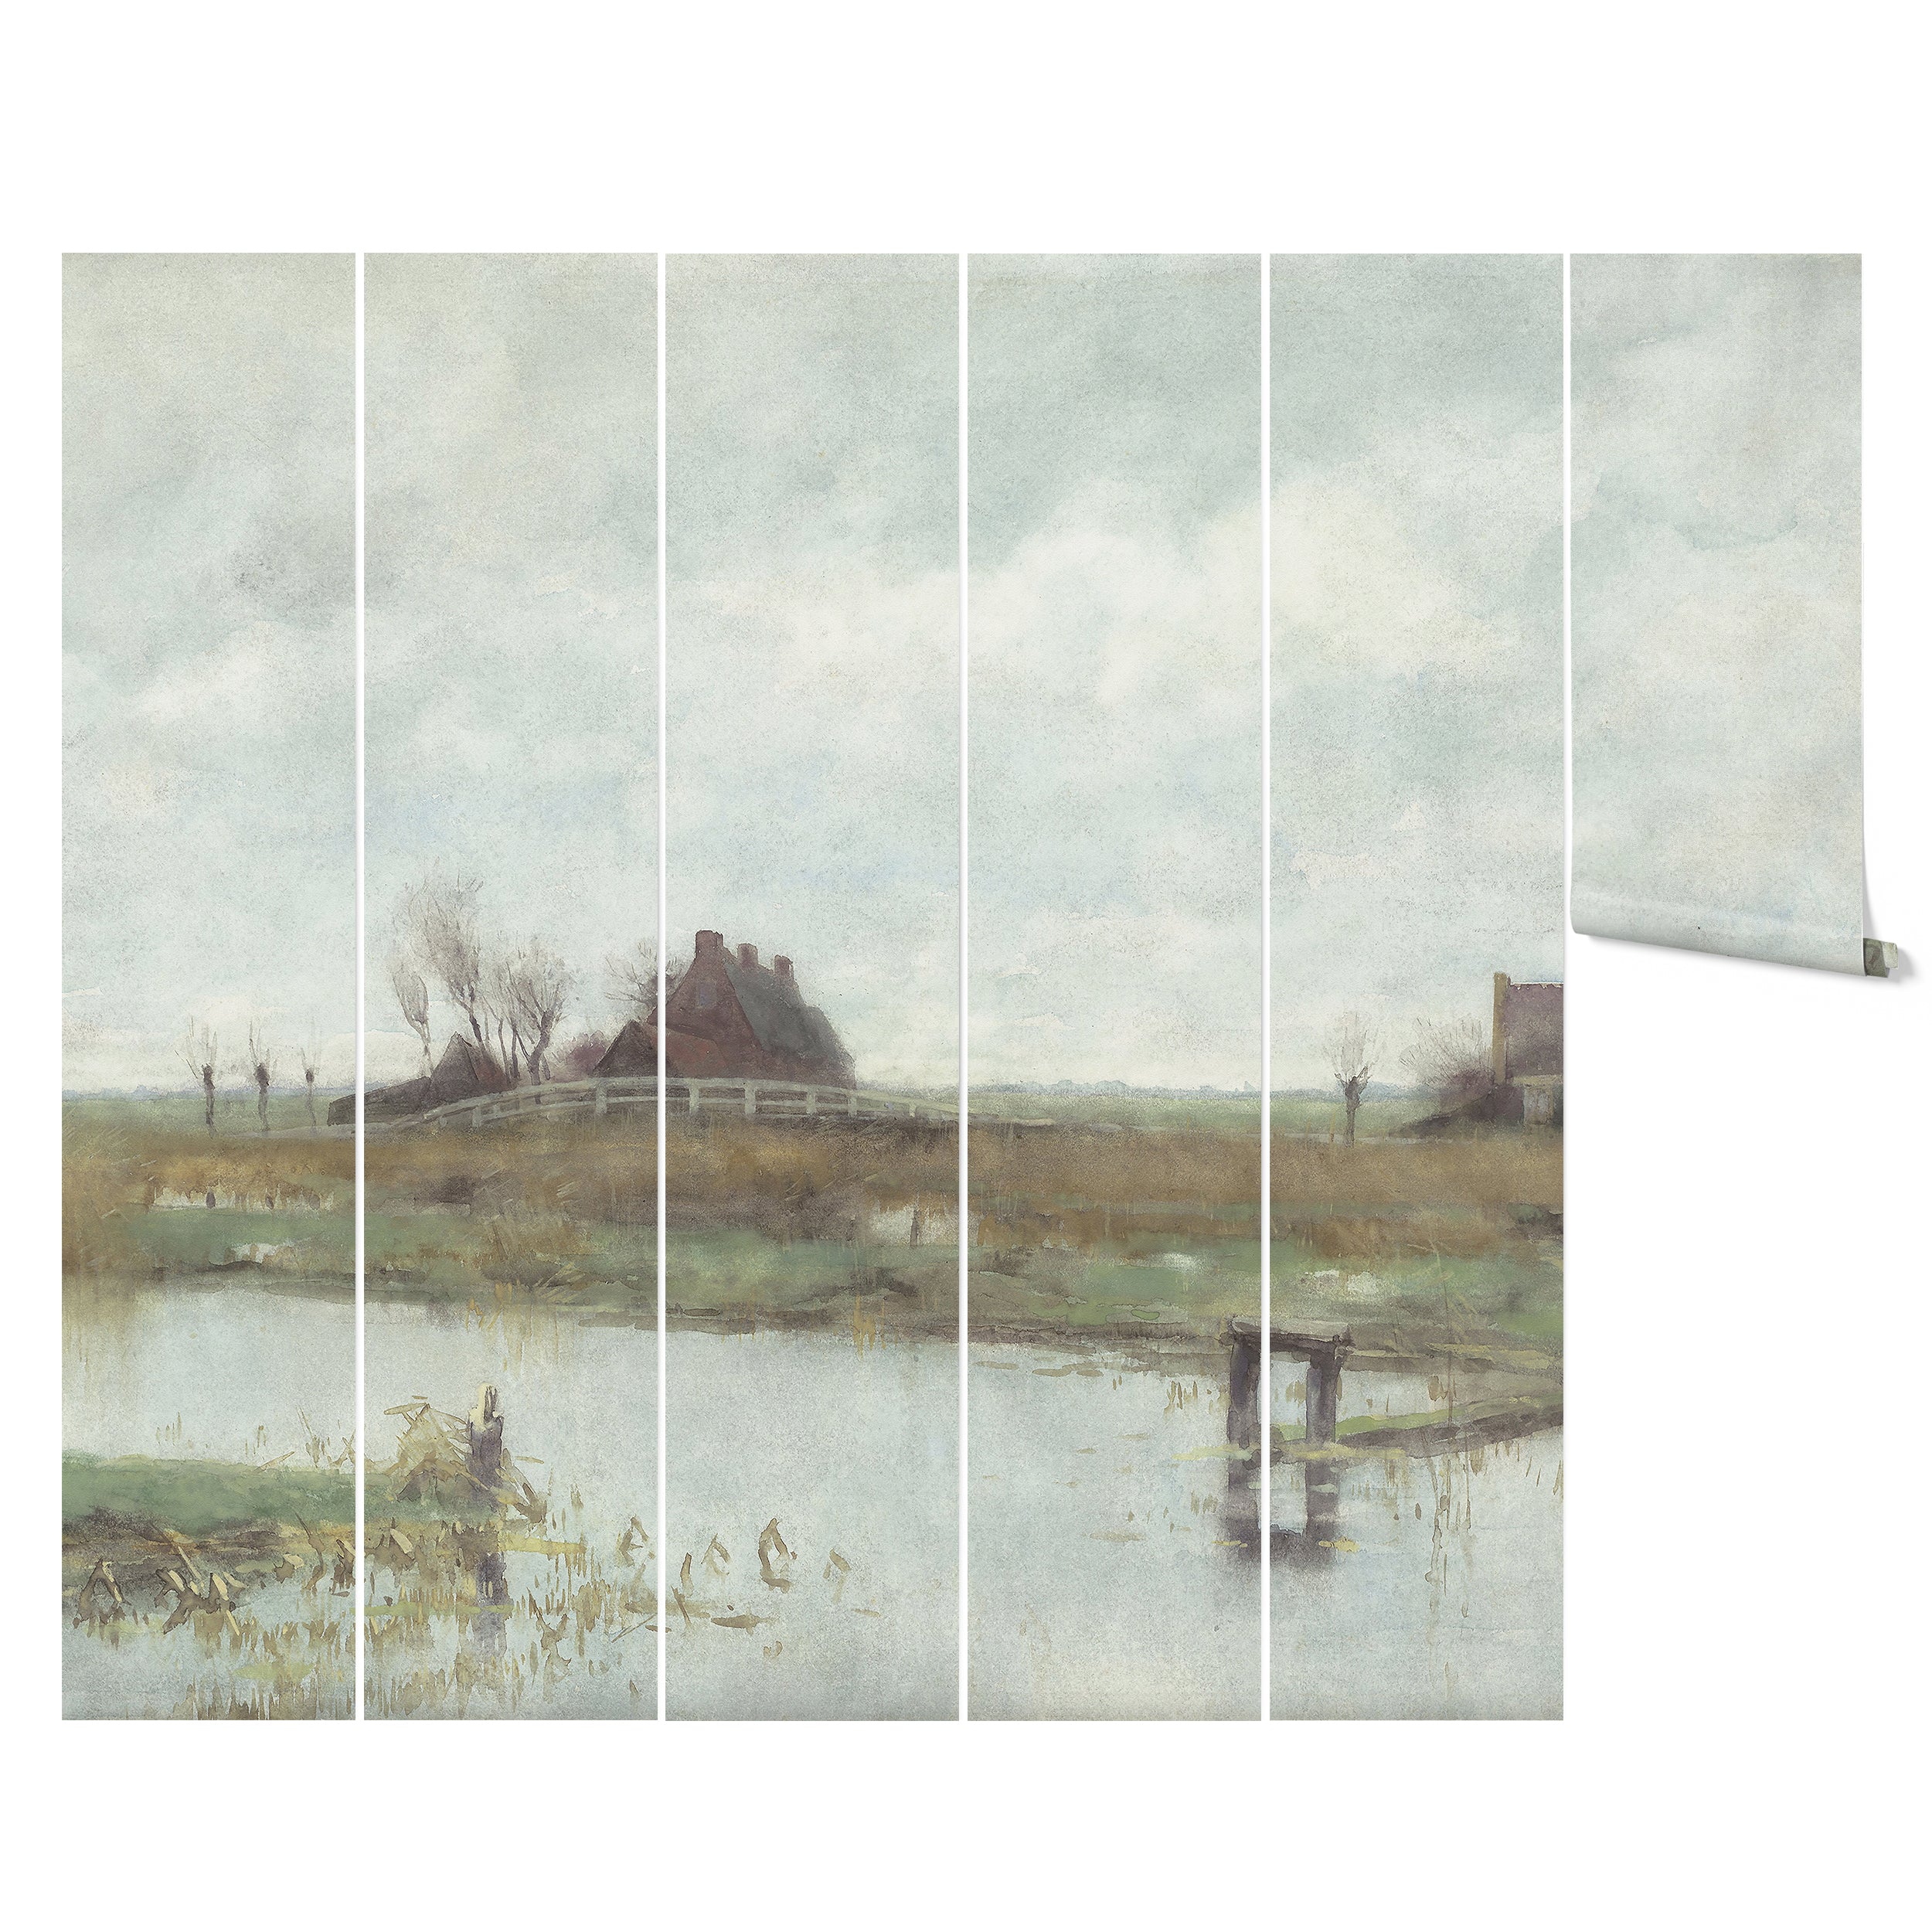 A creative presentation of the River Landscape - Vintage Mural divided into six vertical panels. Each panel captures a segment of the tranquil river scene, allowing for a modular and dynamic installation that adds artistic flair and depth to any room’s decor